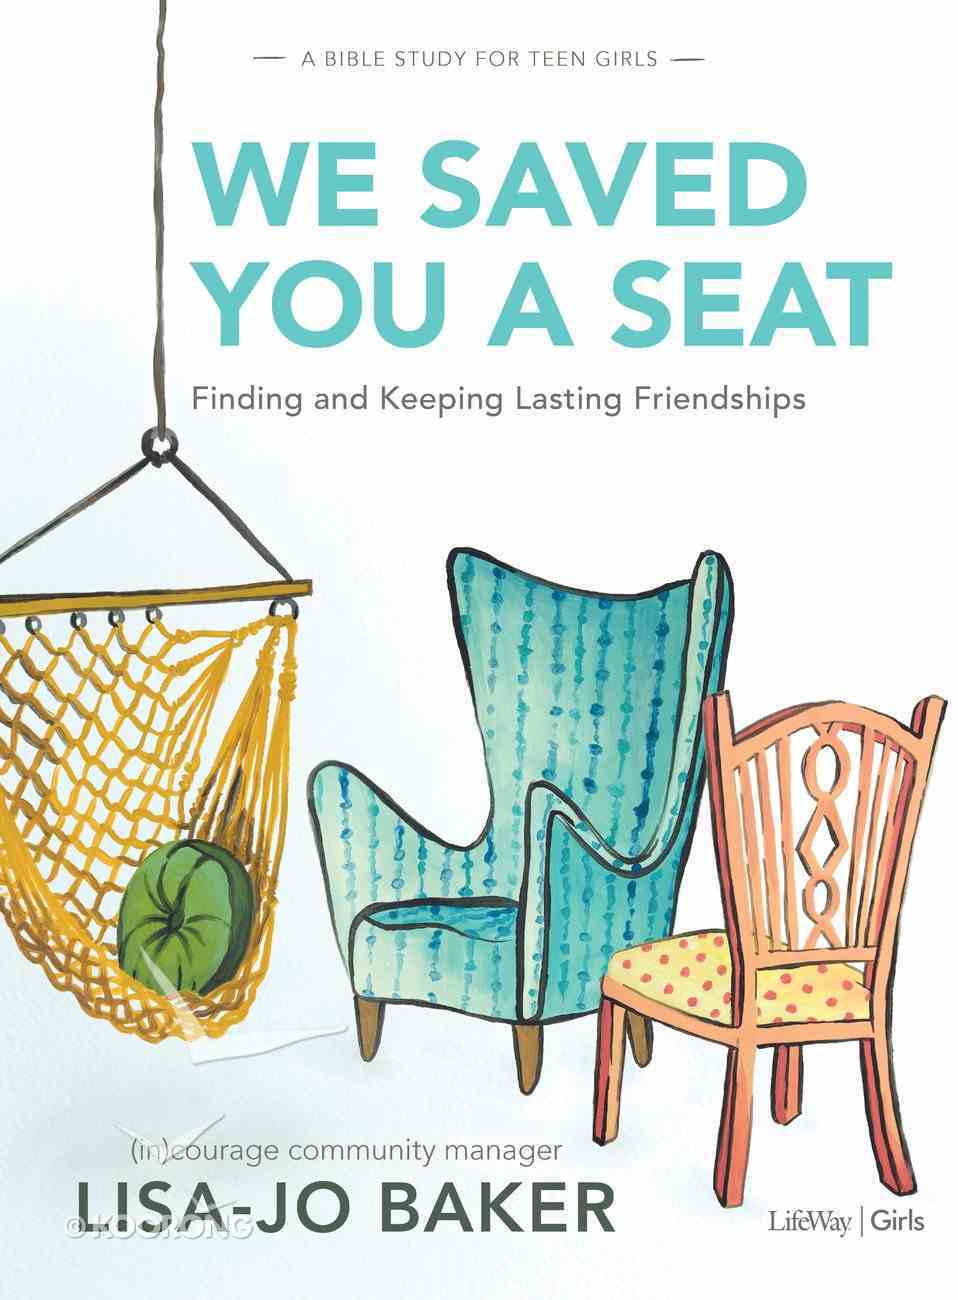 We Saved You a Seat: Finding and Keeping Lasting Friendships (Teen Girls Bible Study) Paperback